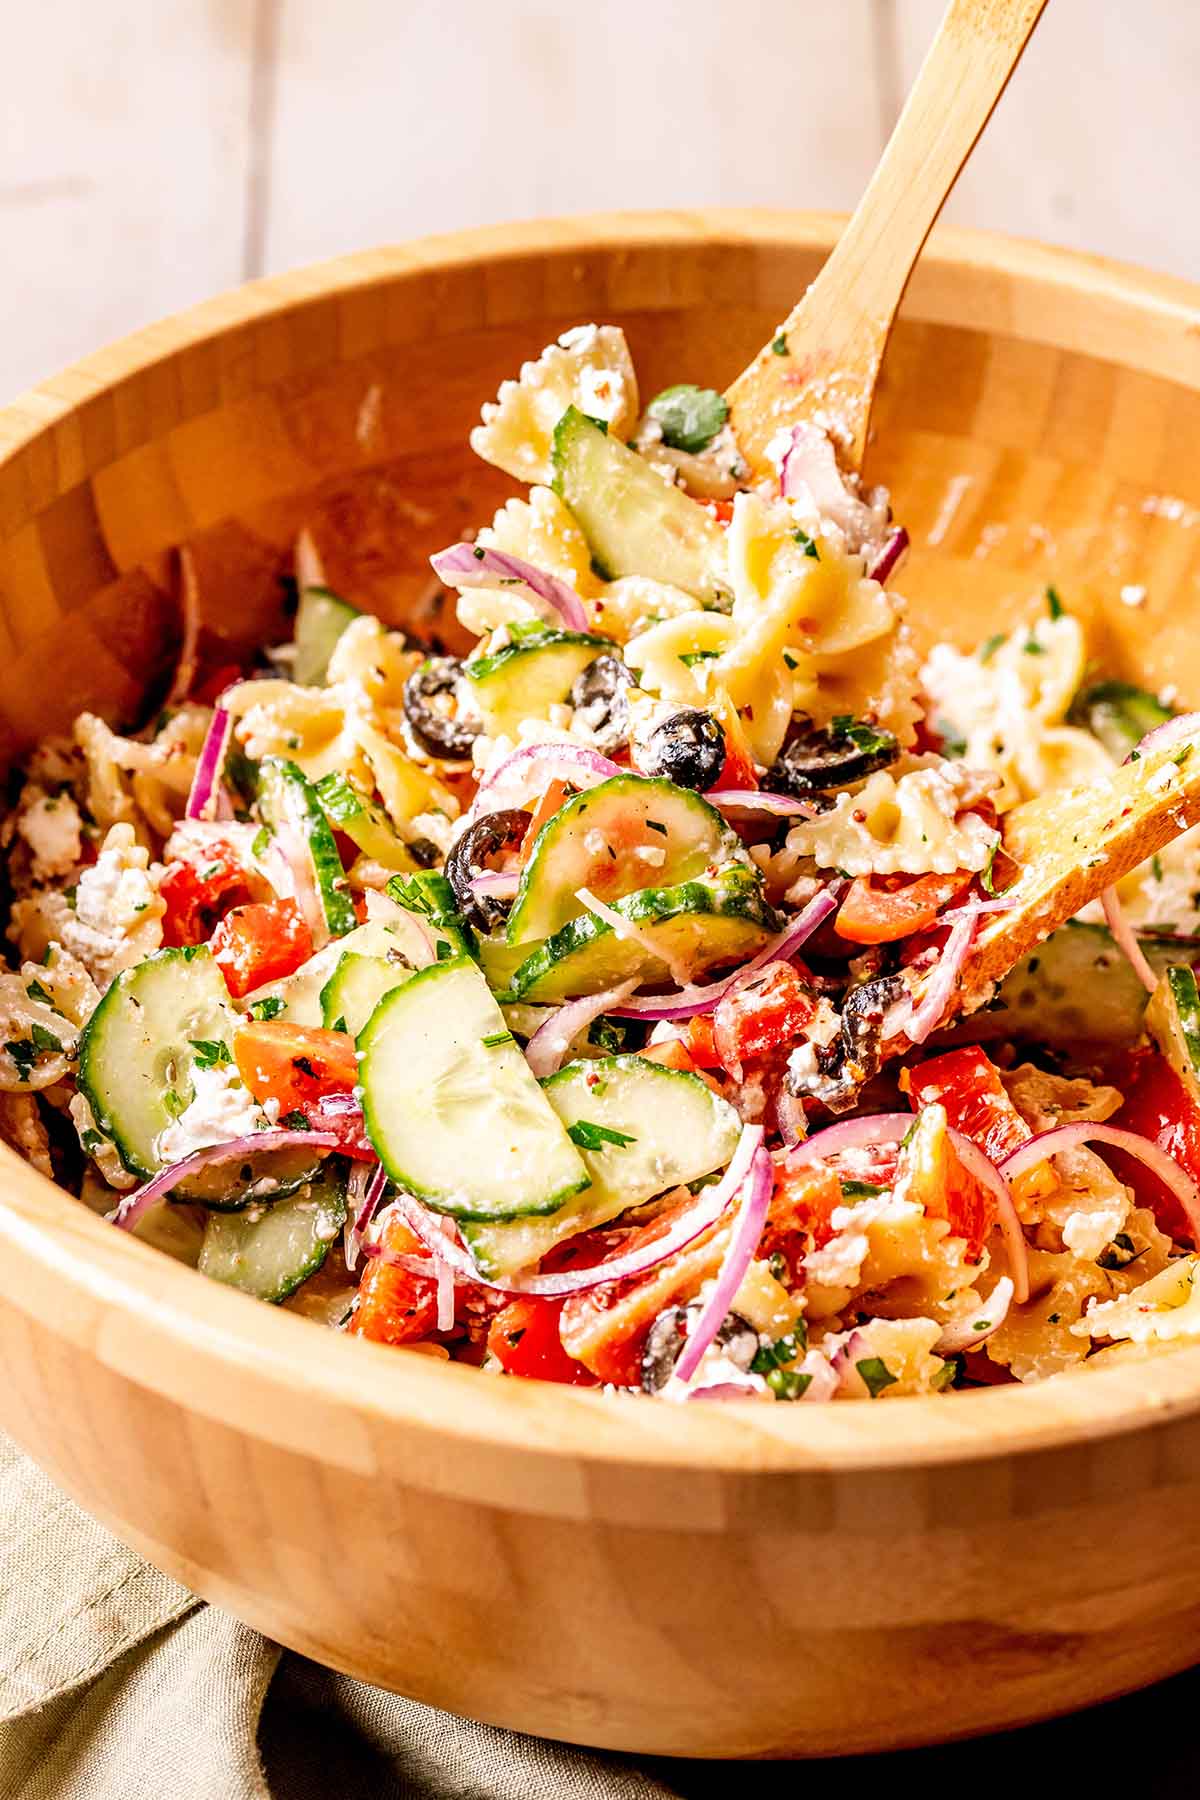 healthy pasta salad in a wooden bowl with a wooden serving spoon.